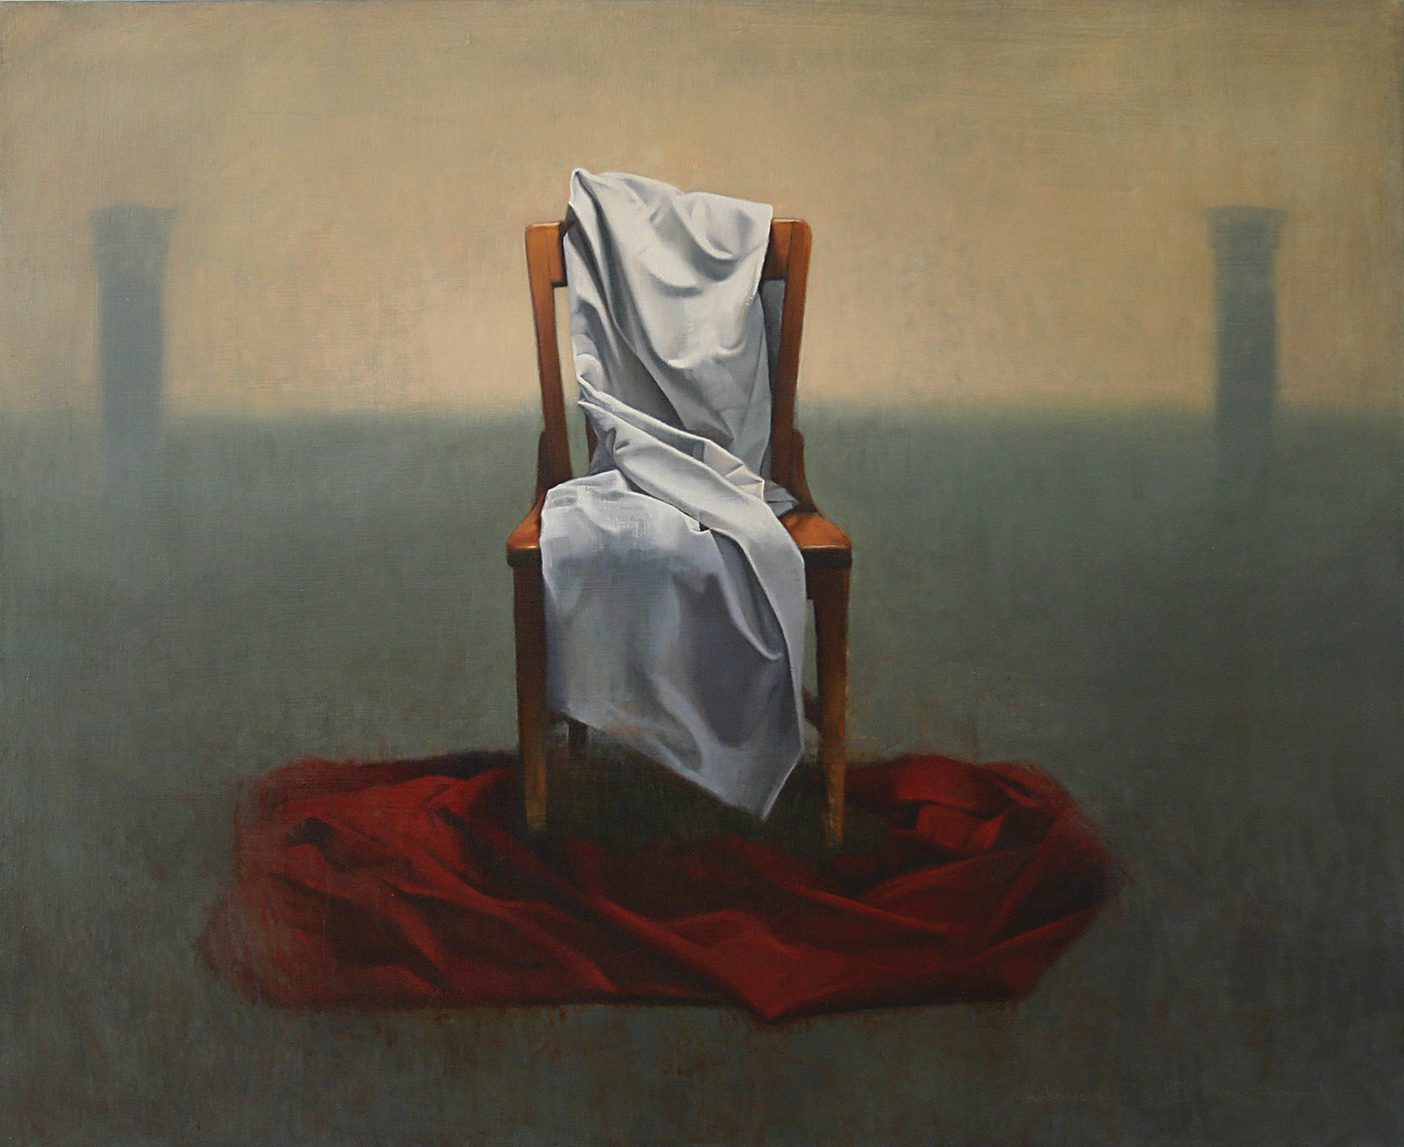 Oil painting of a chair upon a Scarlett red cloth, covered partially by a white cloth.